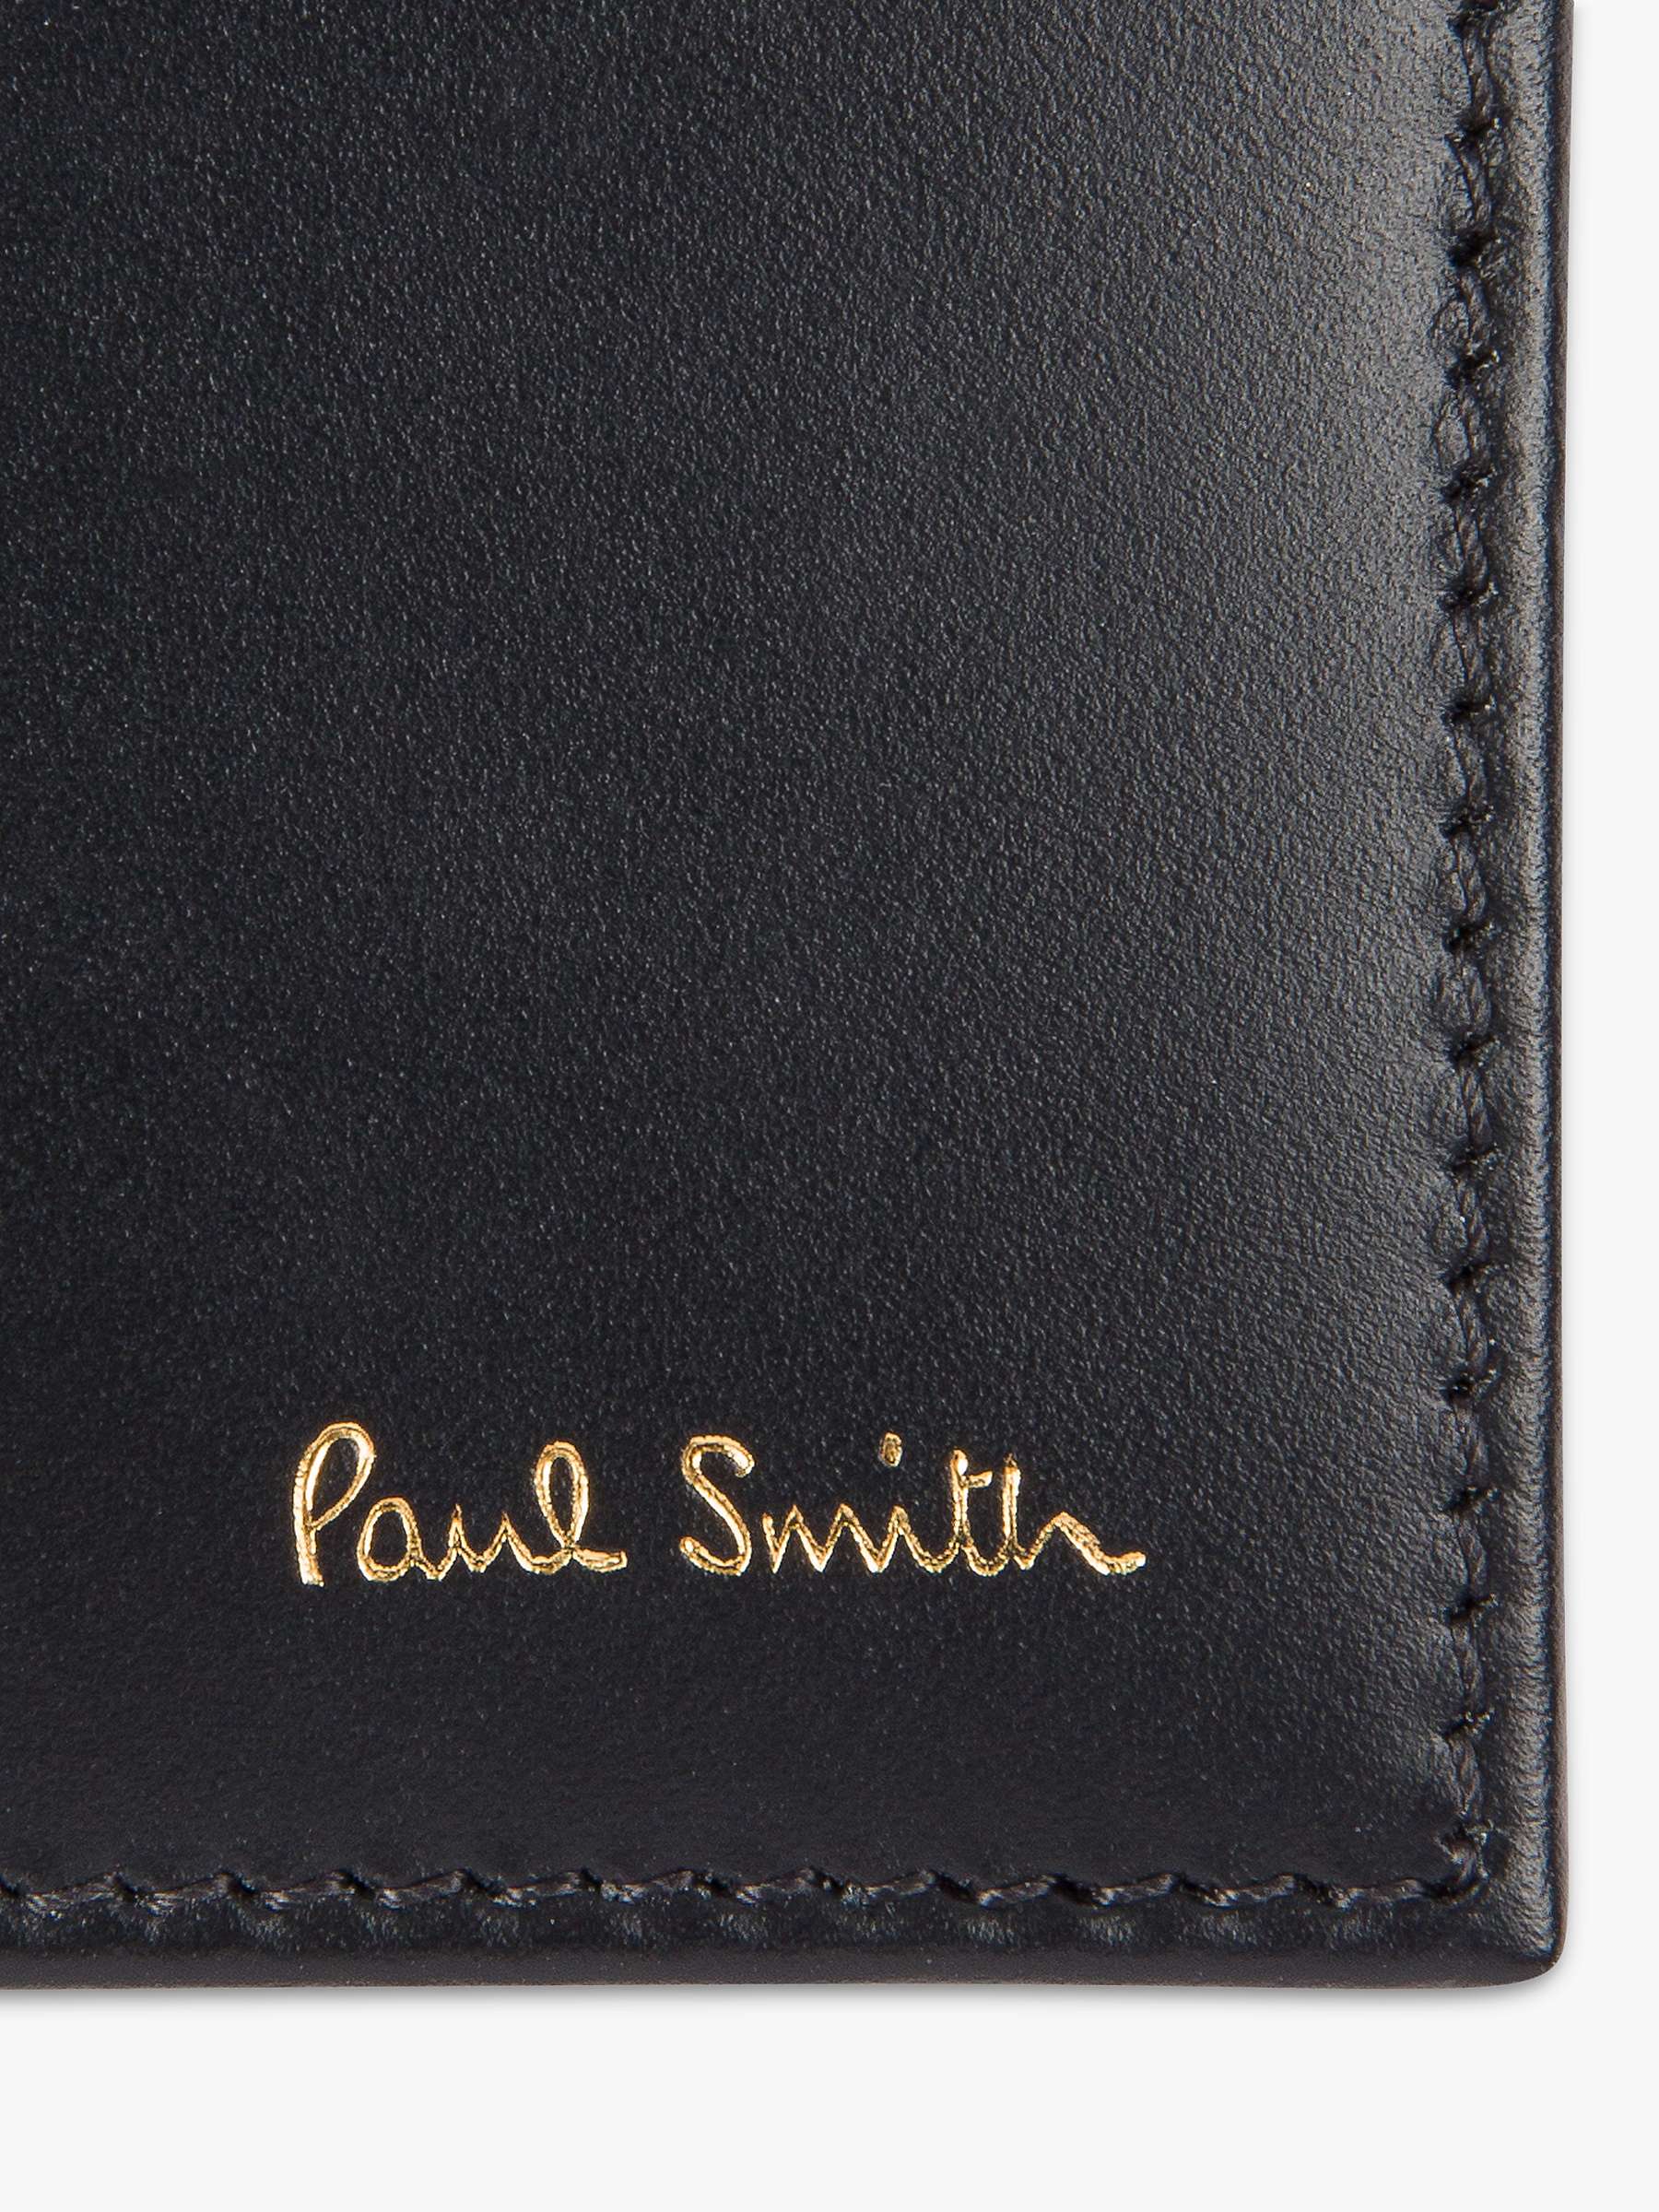 Buy Paul Smith Interior Signature Stripe Leather Wallet Online at johnlewis.com